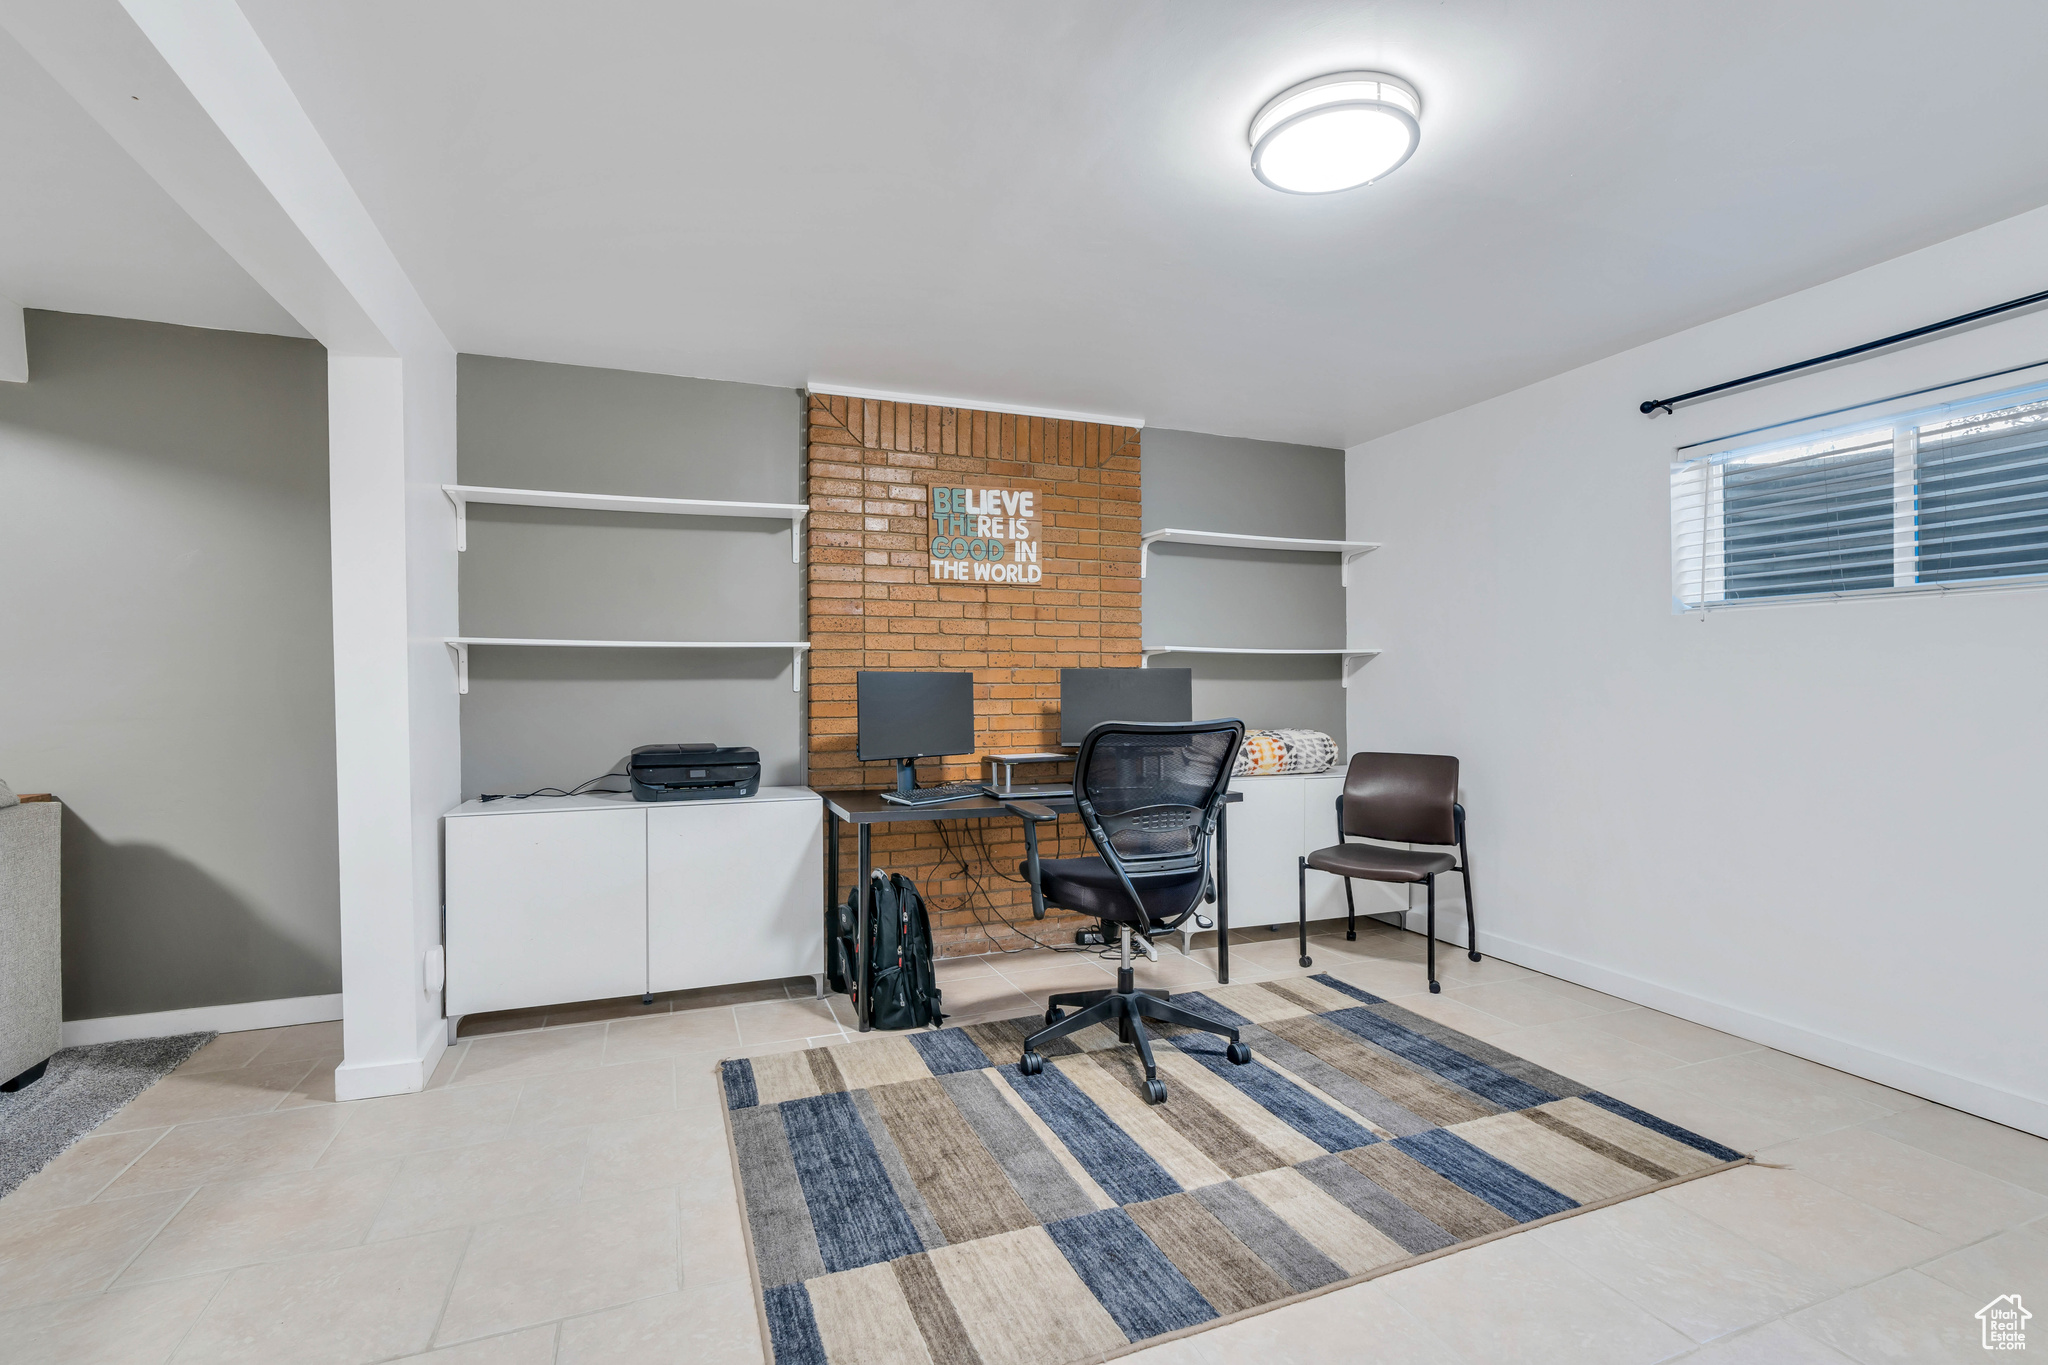 Office space featuring brick wall and light tile floors